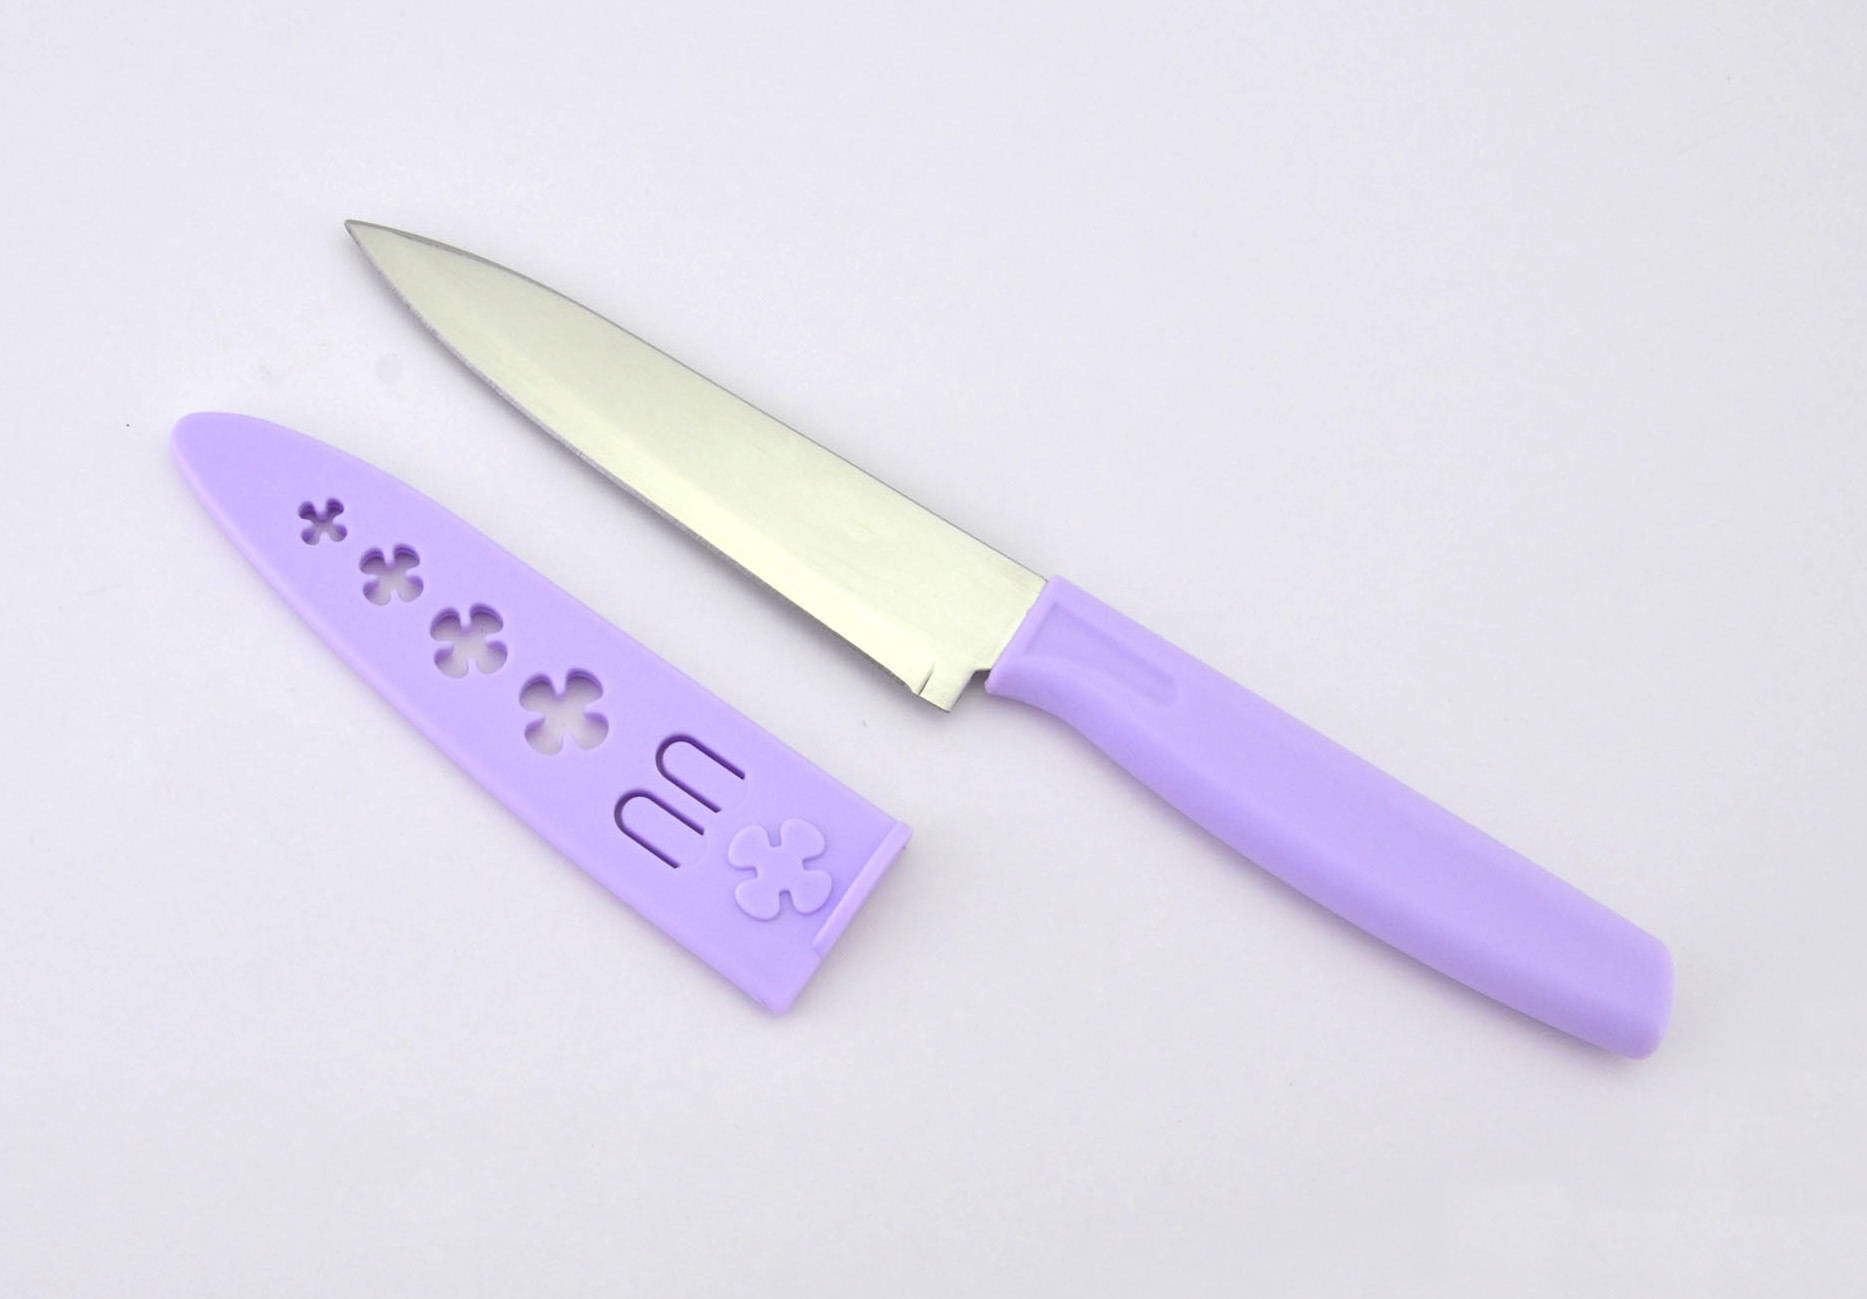 Selling Well Stainless Steel Utility Paring Fruit Knife with Sheath